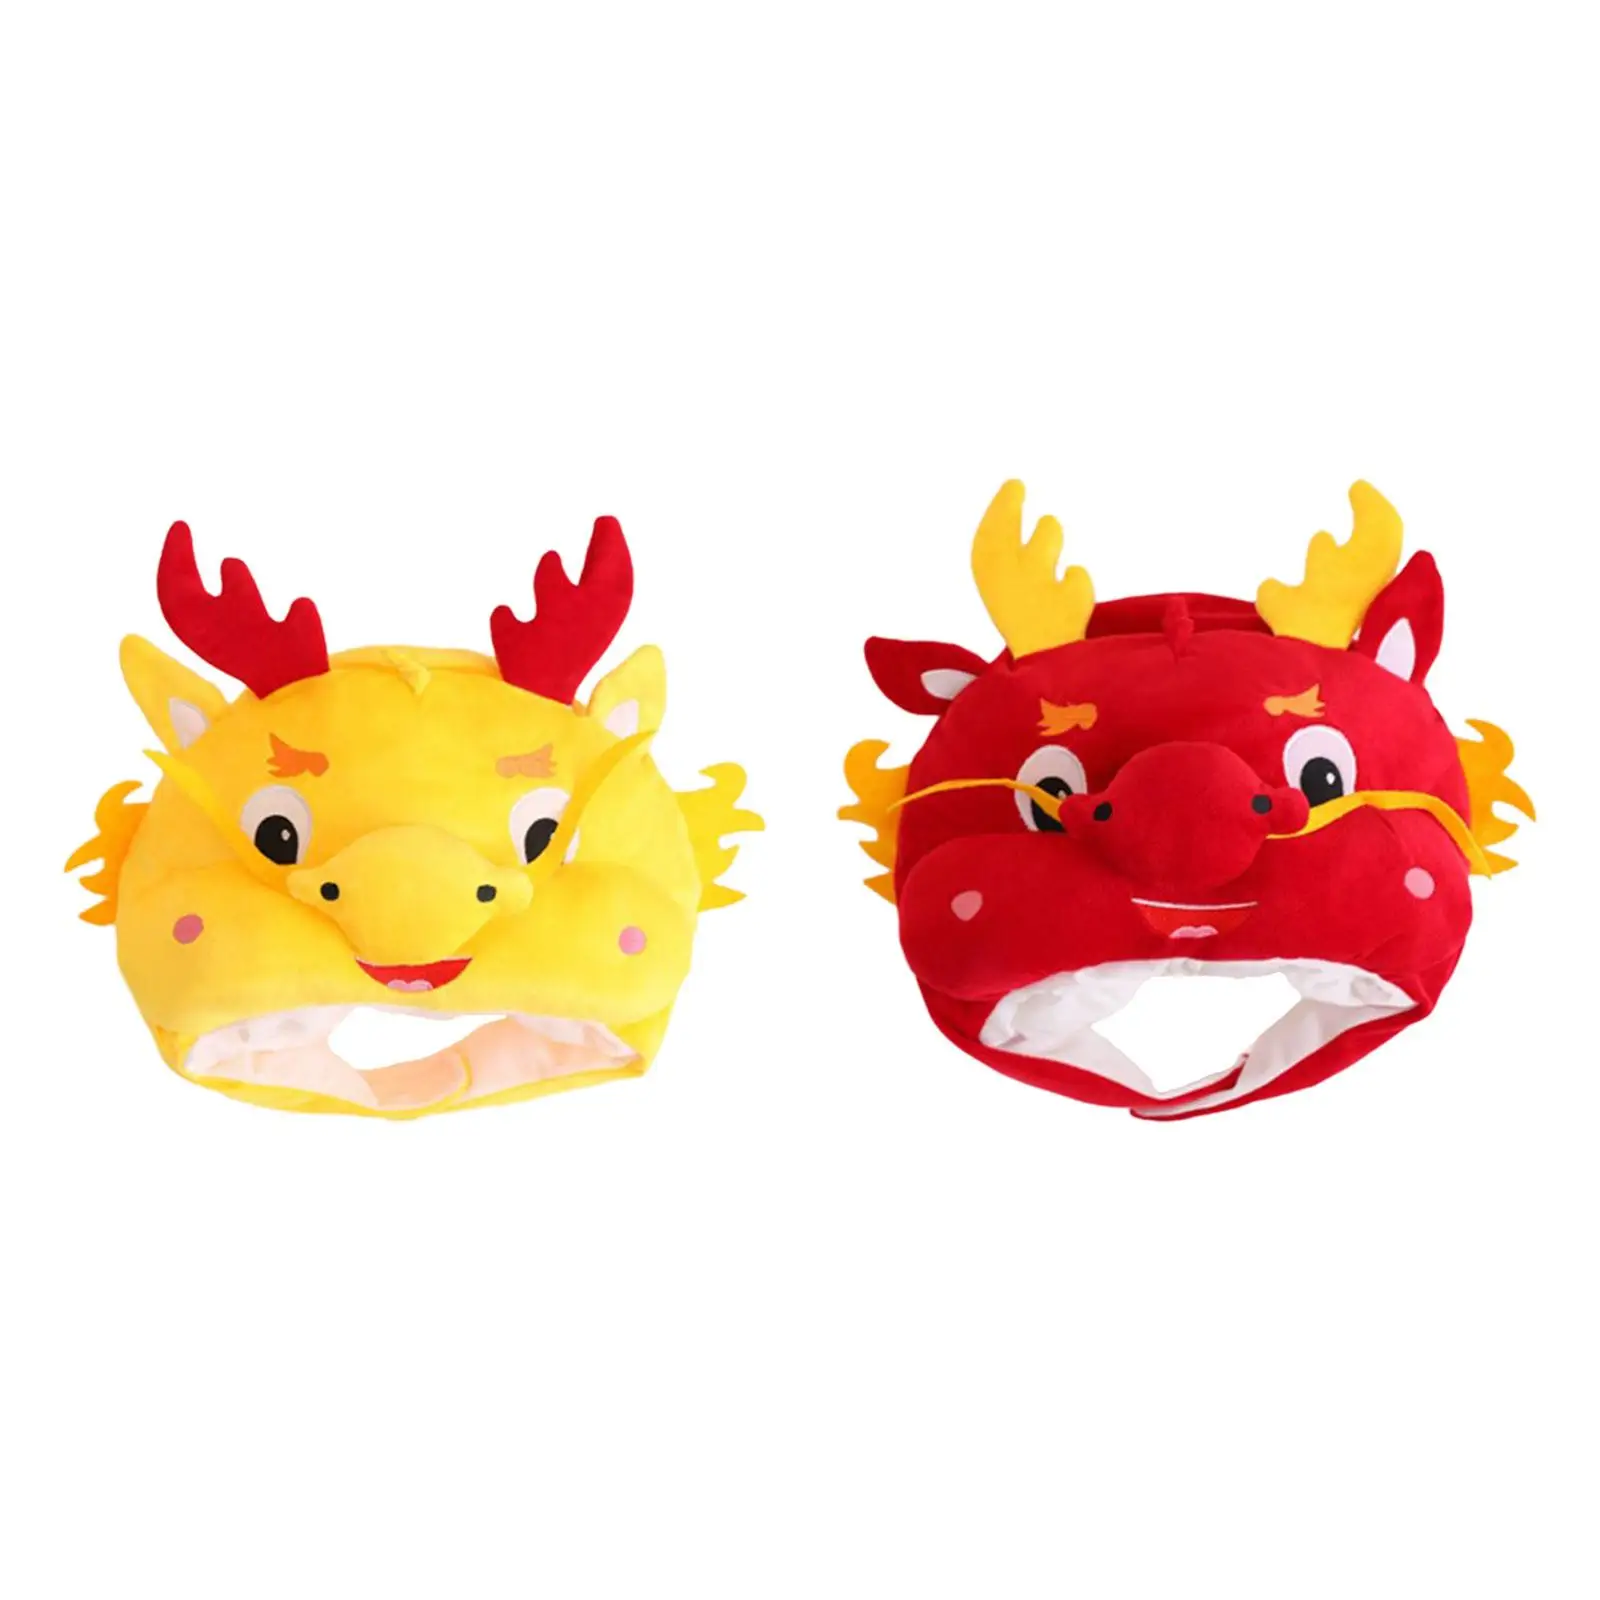 Plush Dragon Hat Fancy Dress Decoration Party Comfortable Funny Headgear for Holiday Role Play Carnival Festive Birthday Party